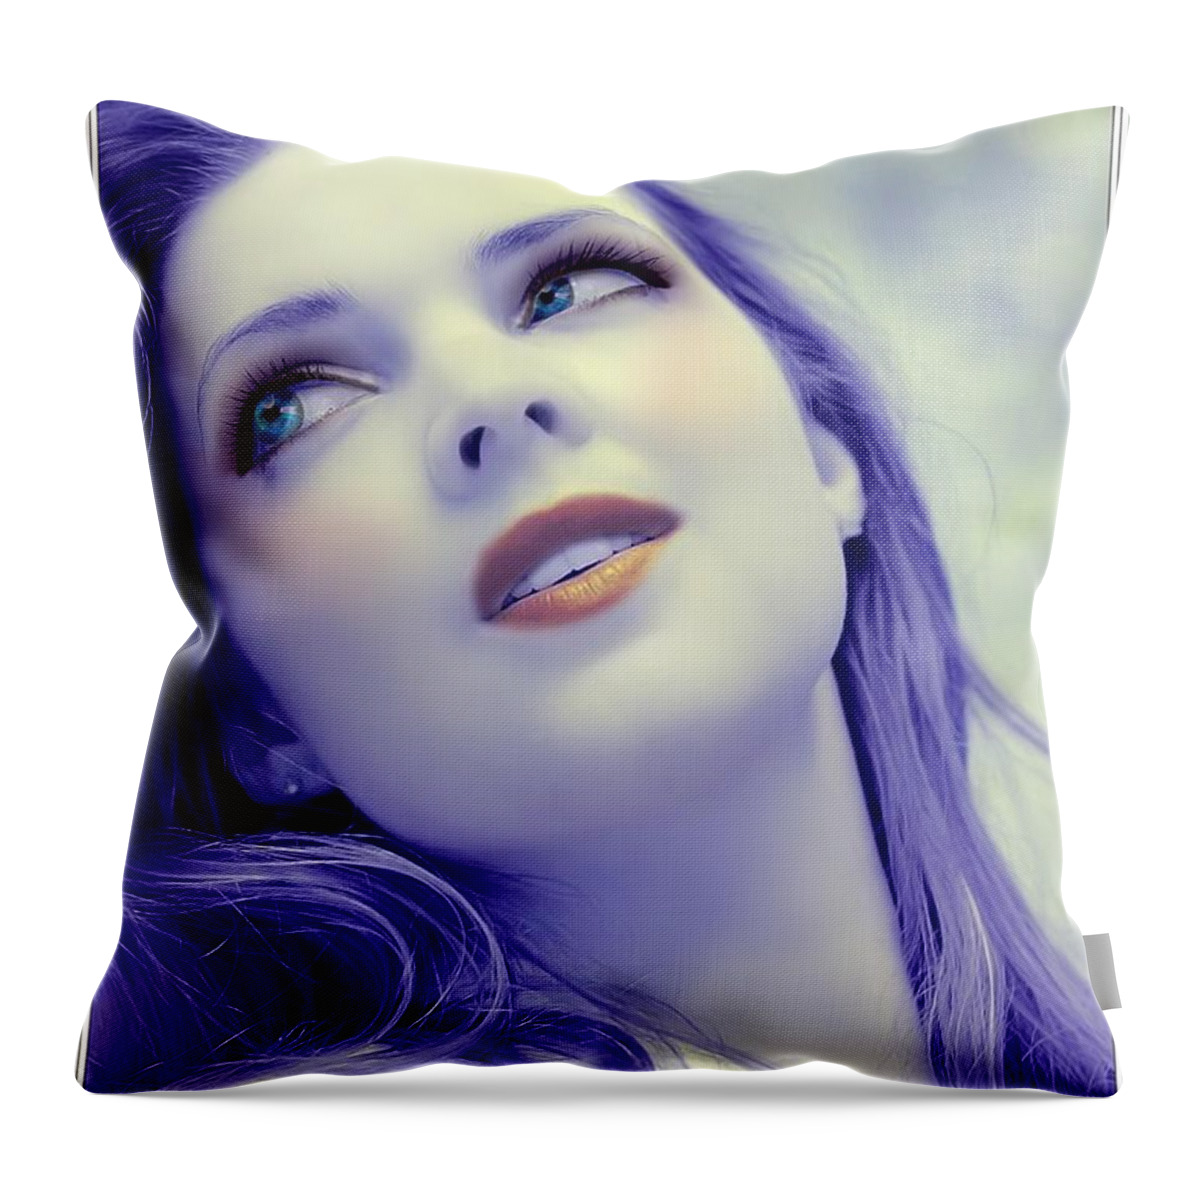 Infra Throw Pillow featuring the photograph Reflective by Jon Volden